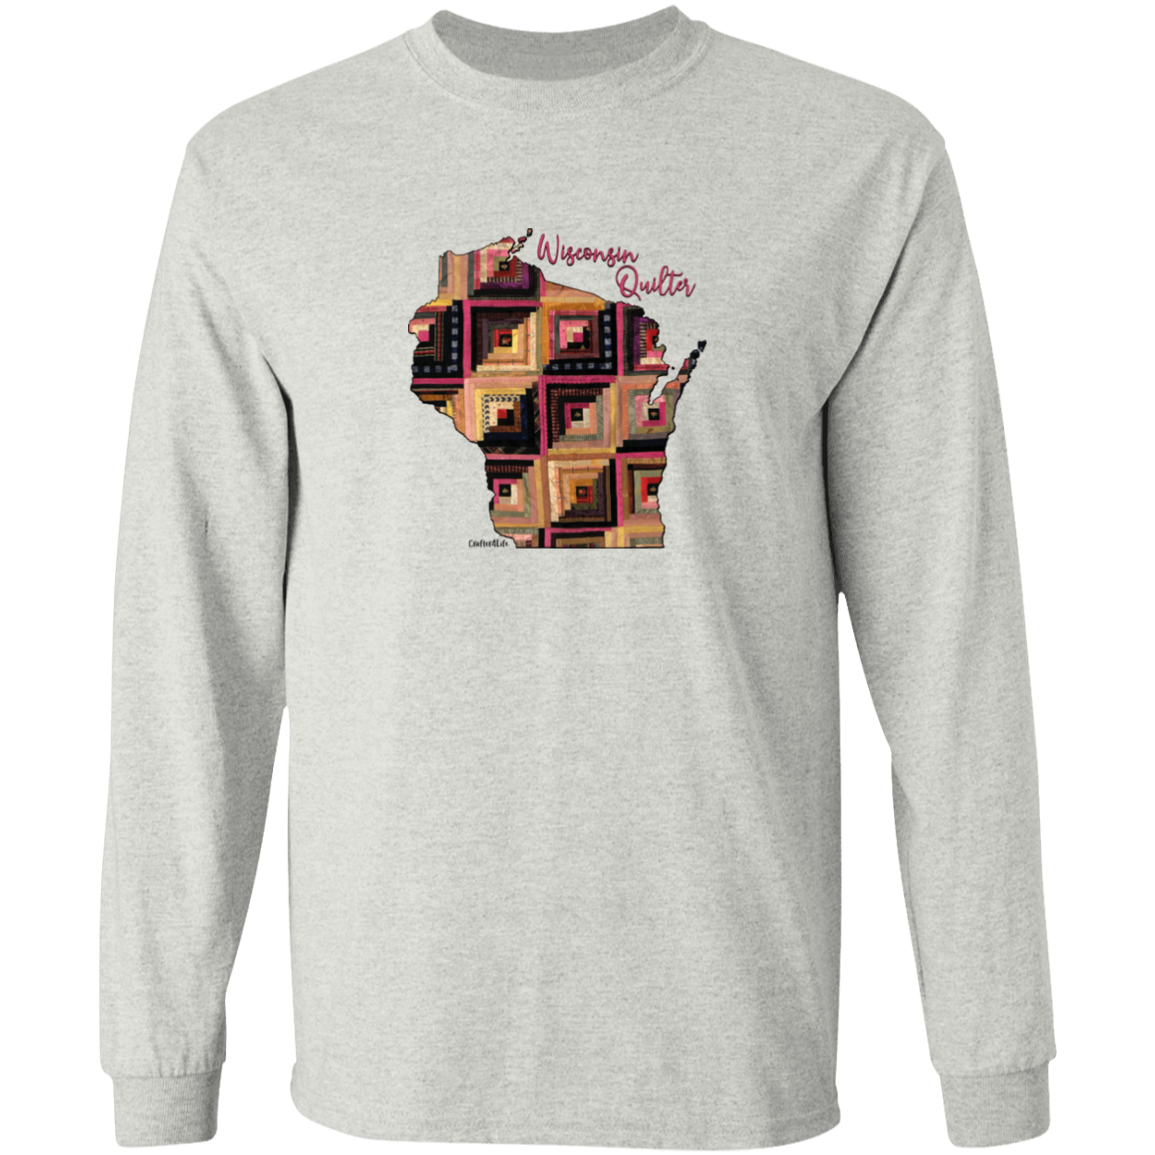 Wisconsin Quilter Long Sleeve T-Shirt, Gift for Quilting Friends and Family